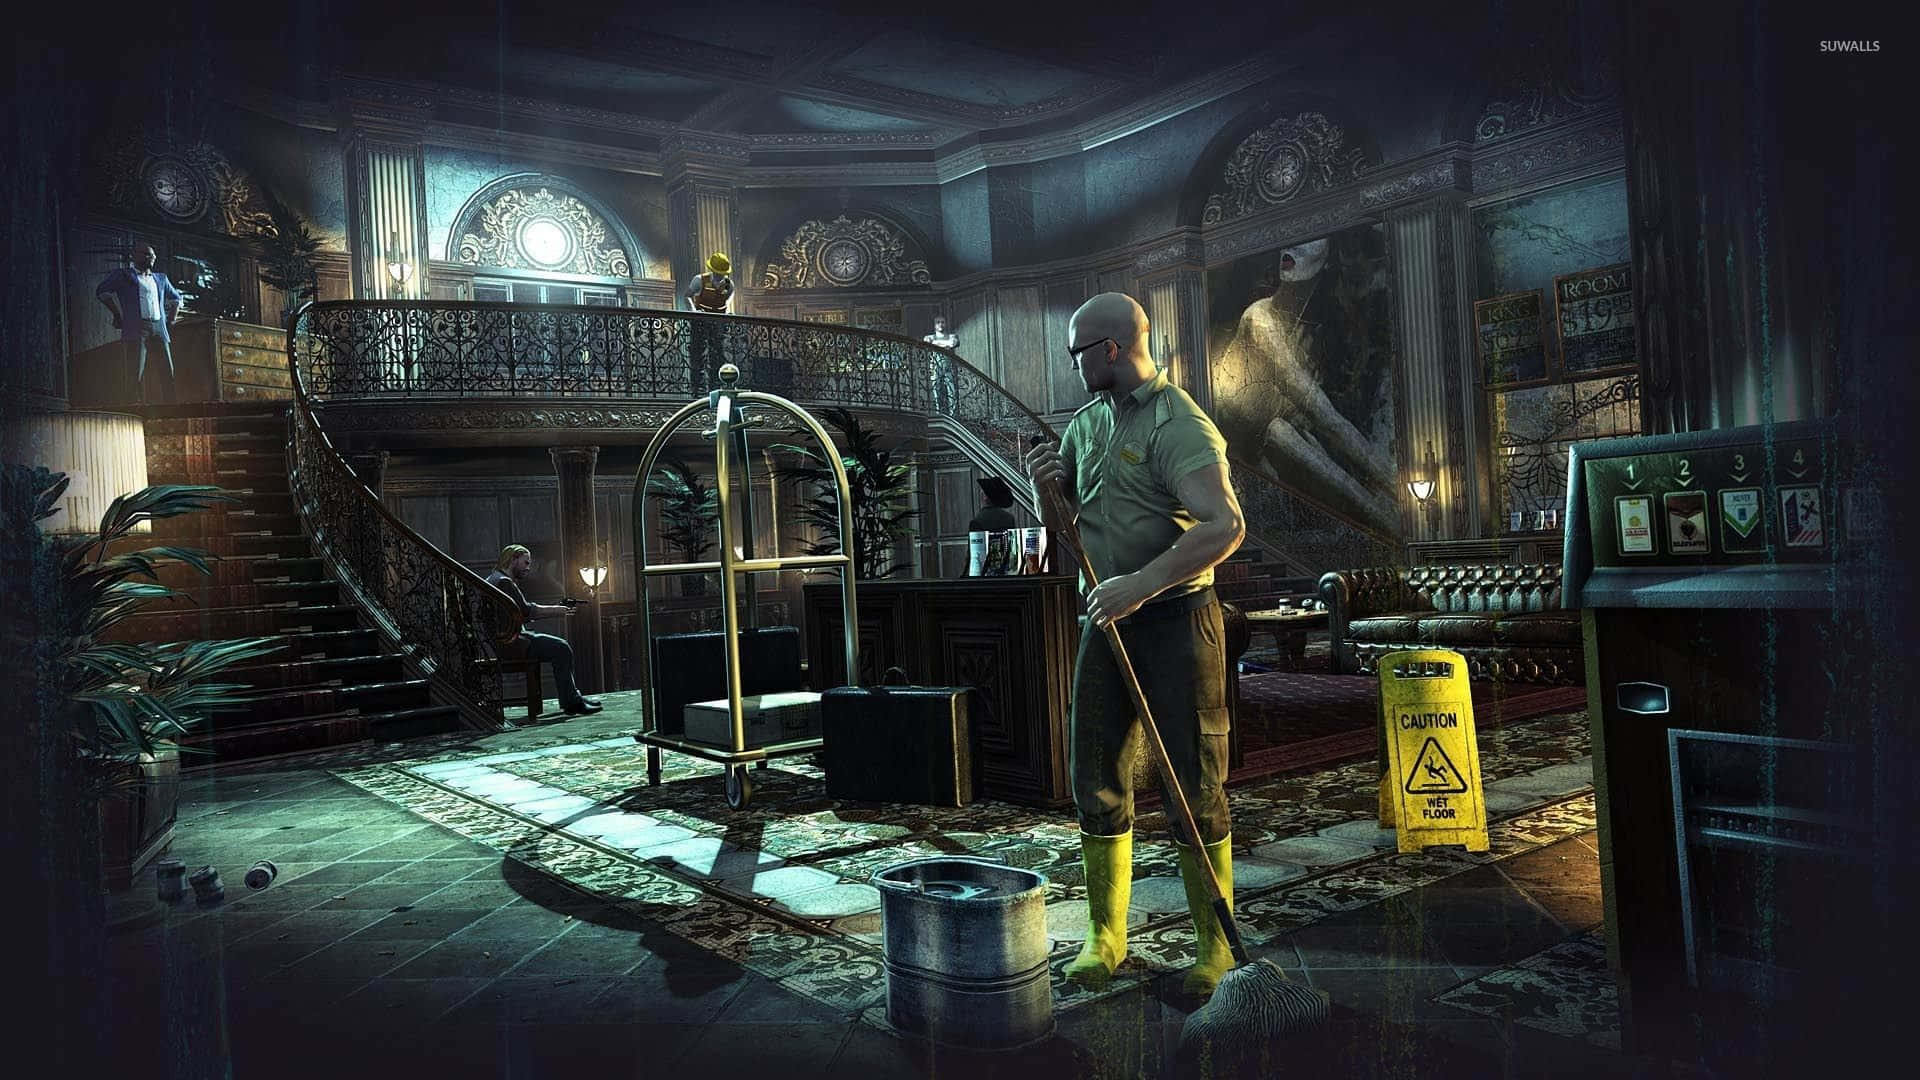 Agent 47 takes his next assignment in Hitman Absolution